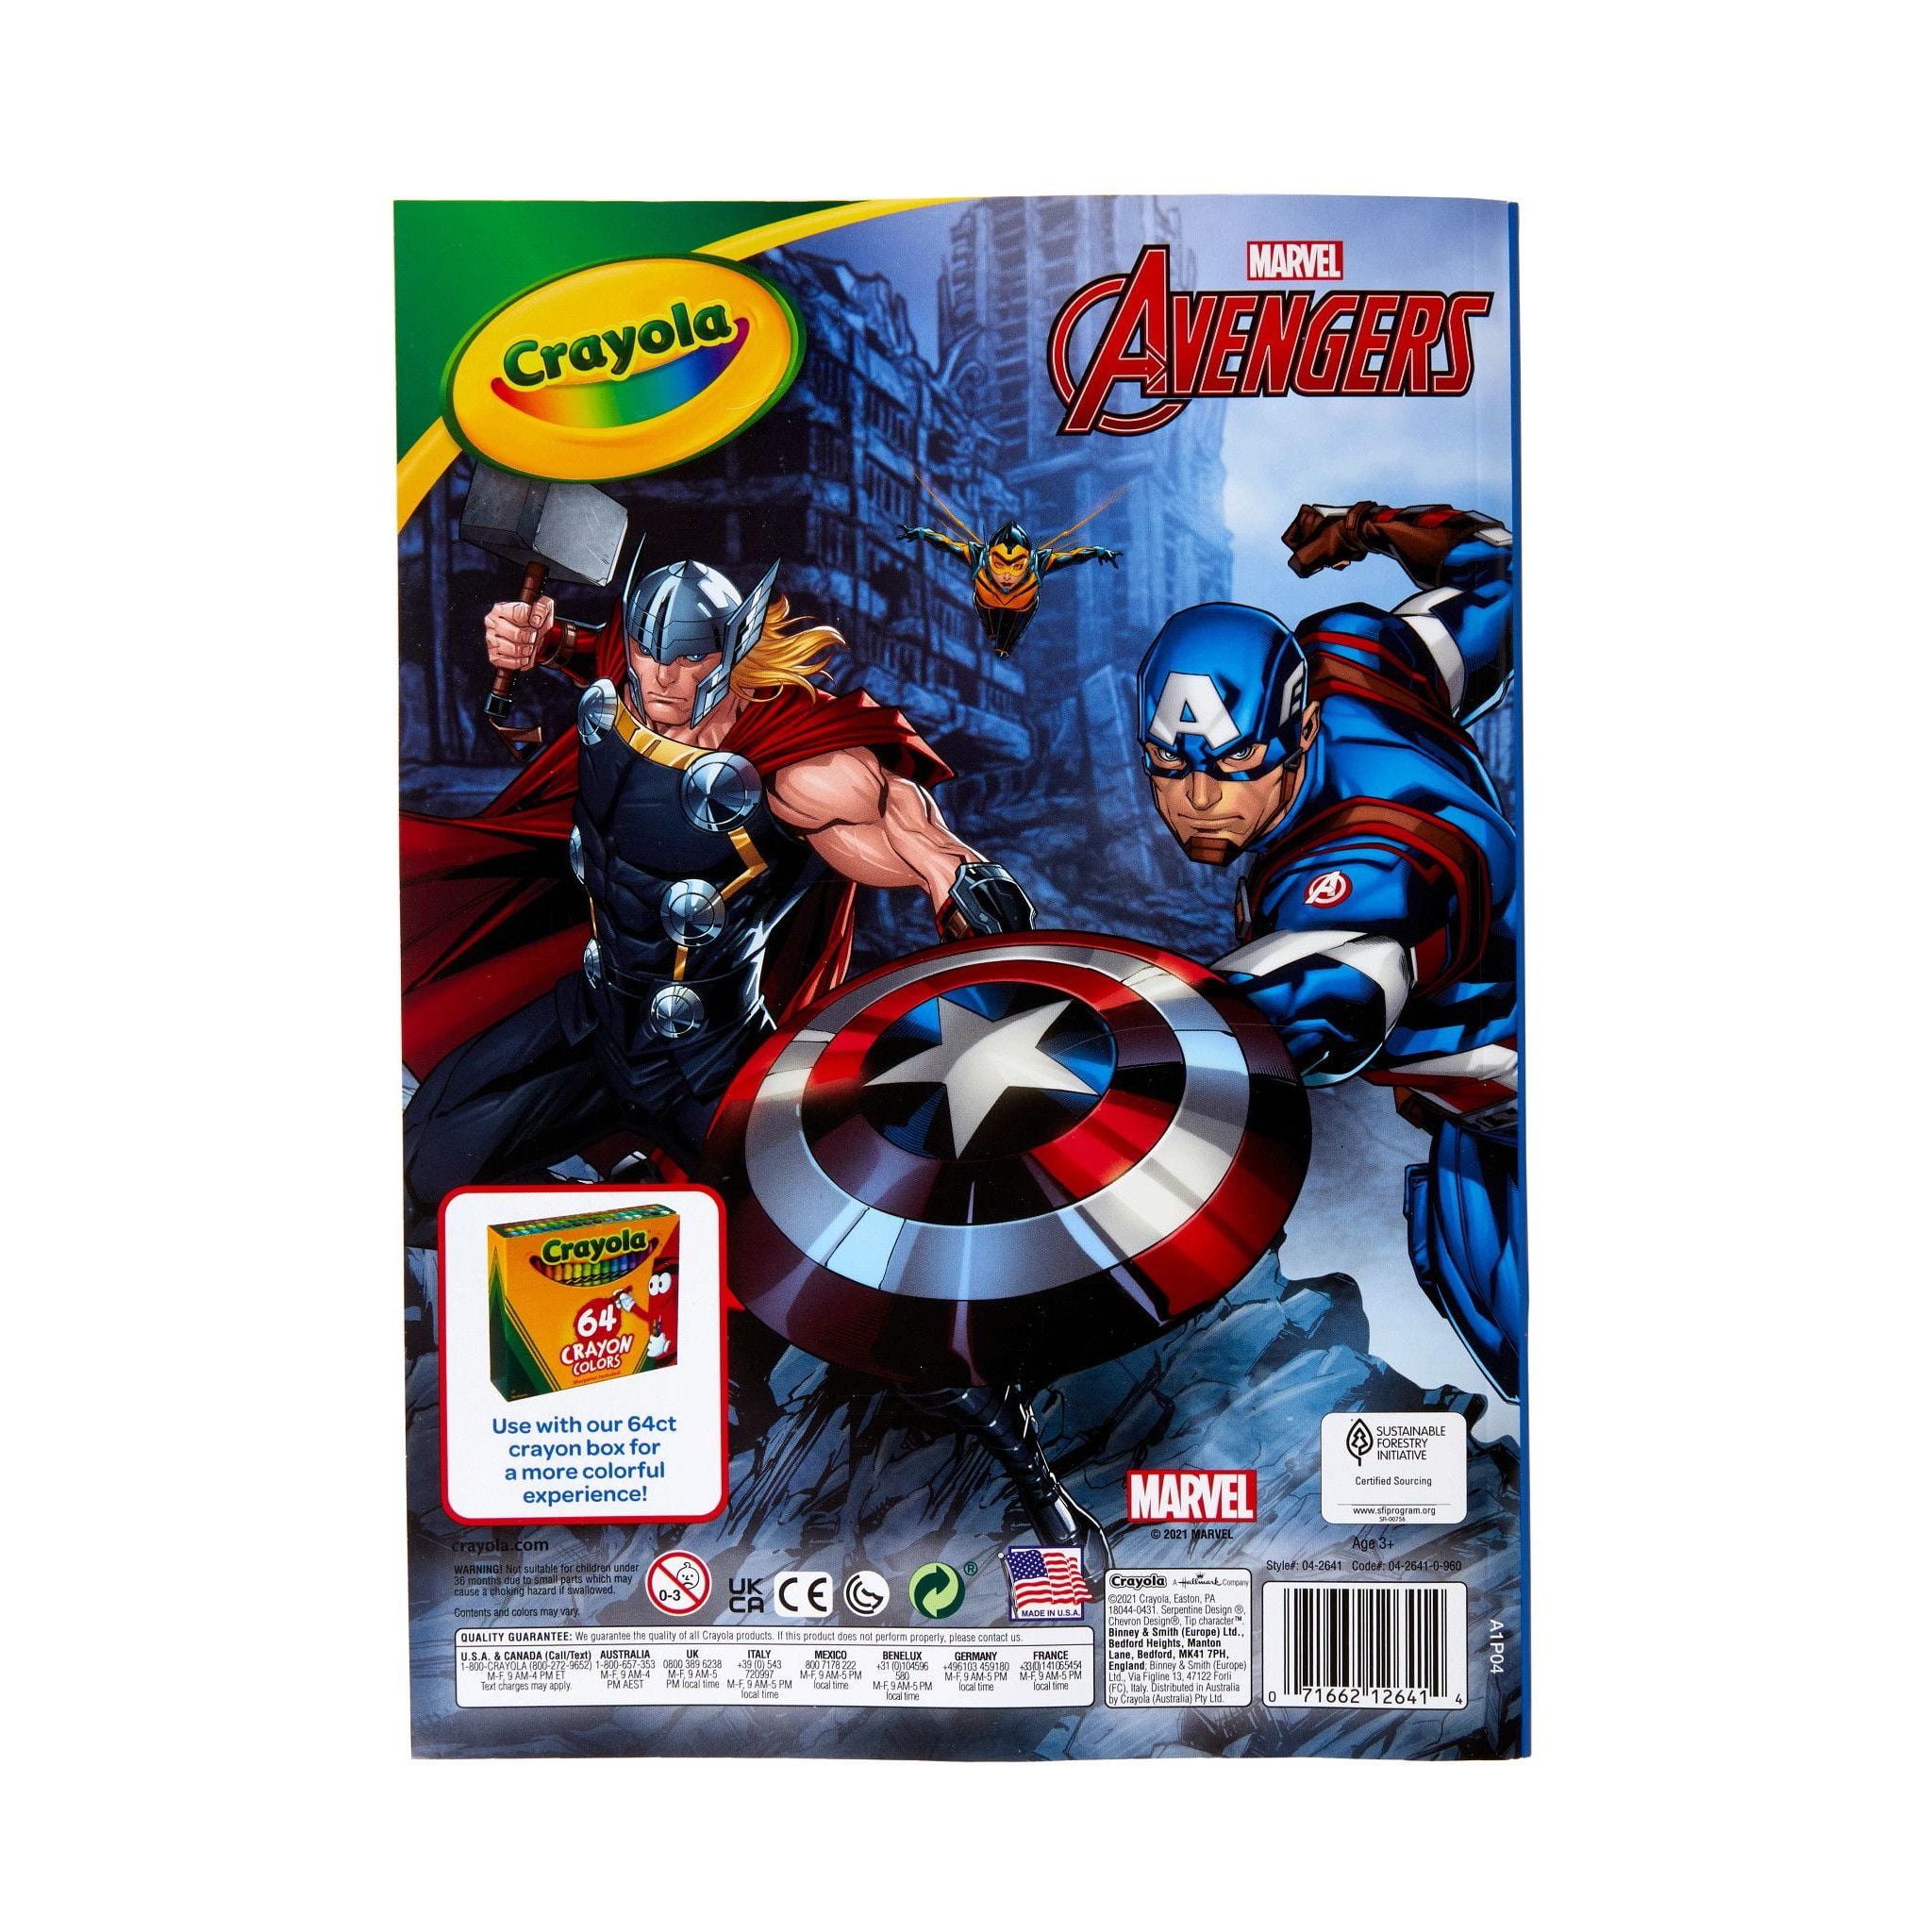 Marvel Avengers Crayola Color and Sticker Book Packaging May Vary Gifting